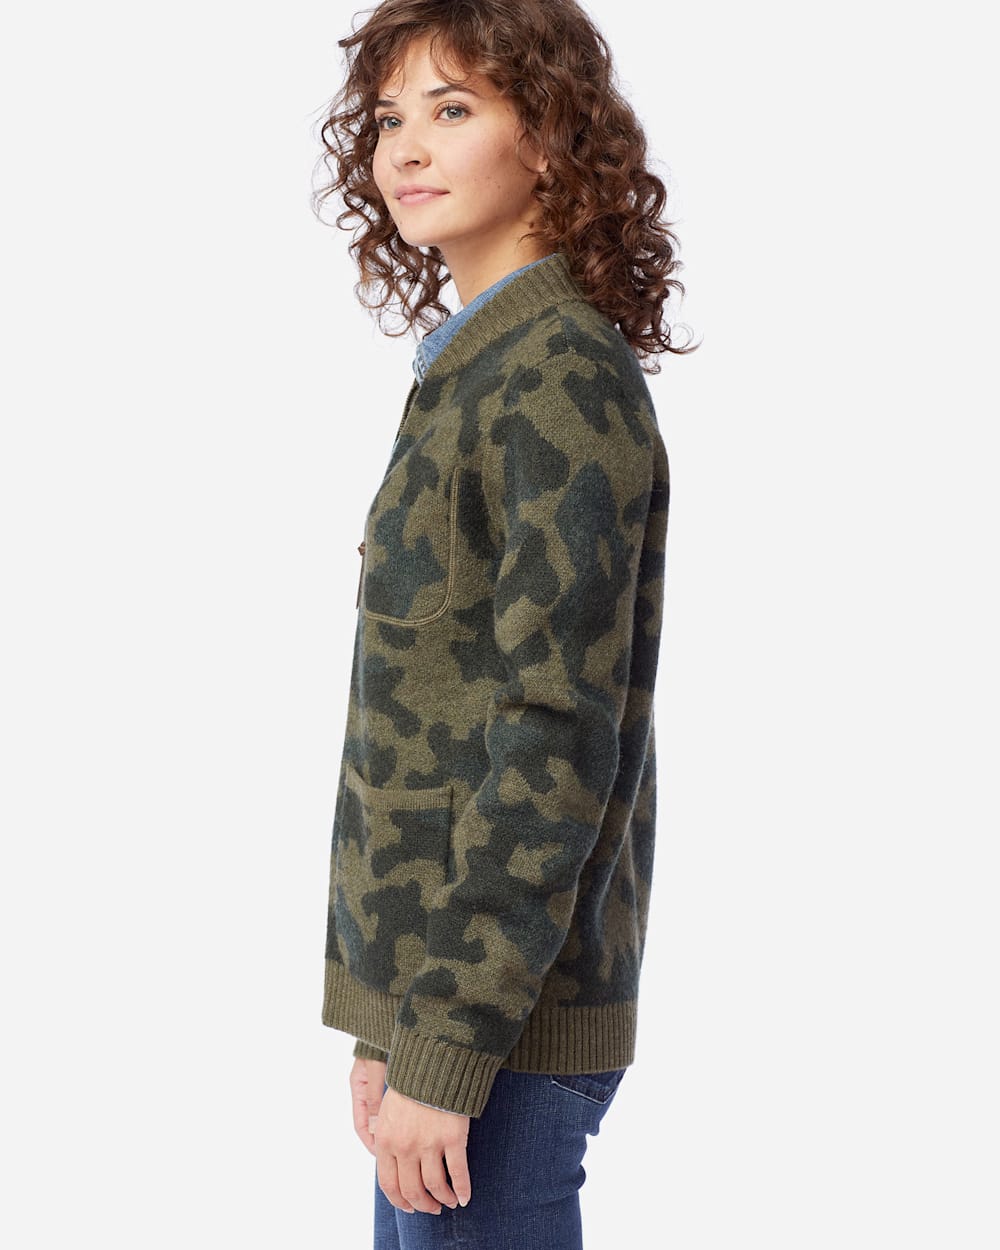 ALTERNATE VIEW OF WOMEN'S BOILED WOOL BOMBER JACKET IN OLIVE CAMO image number 2